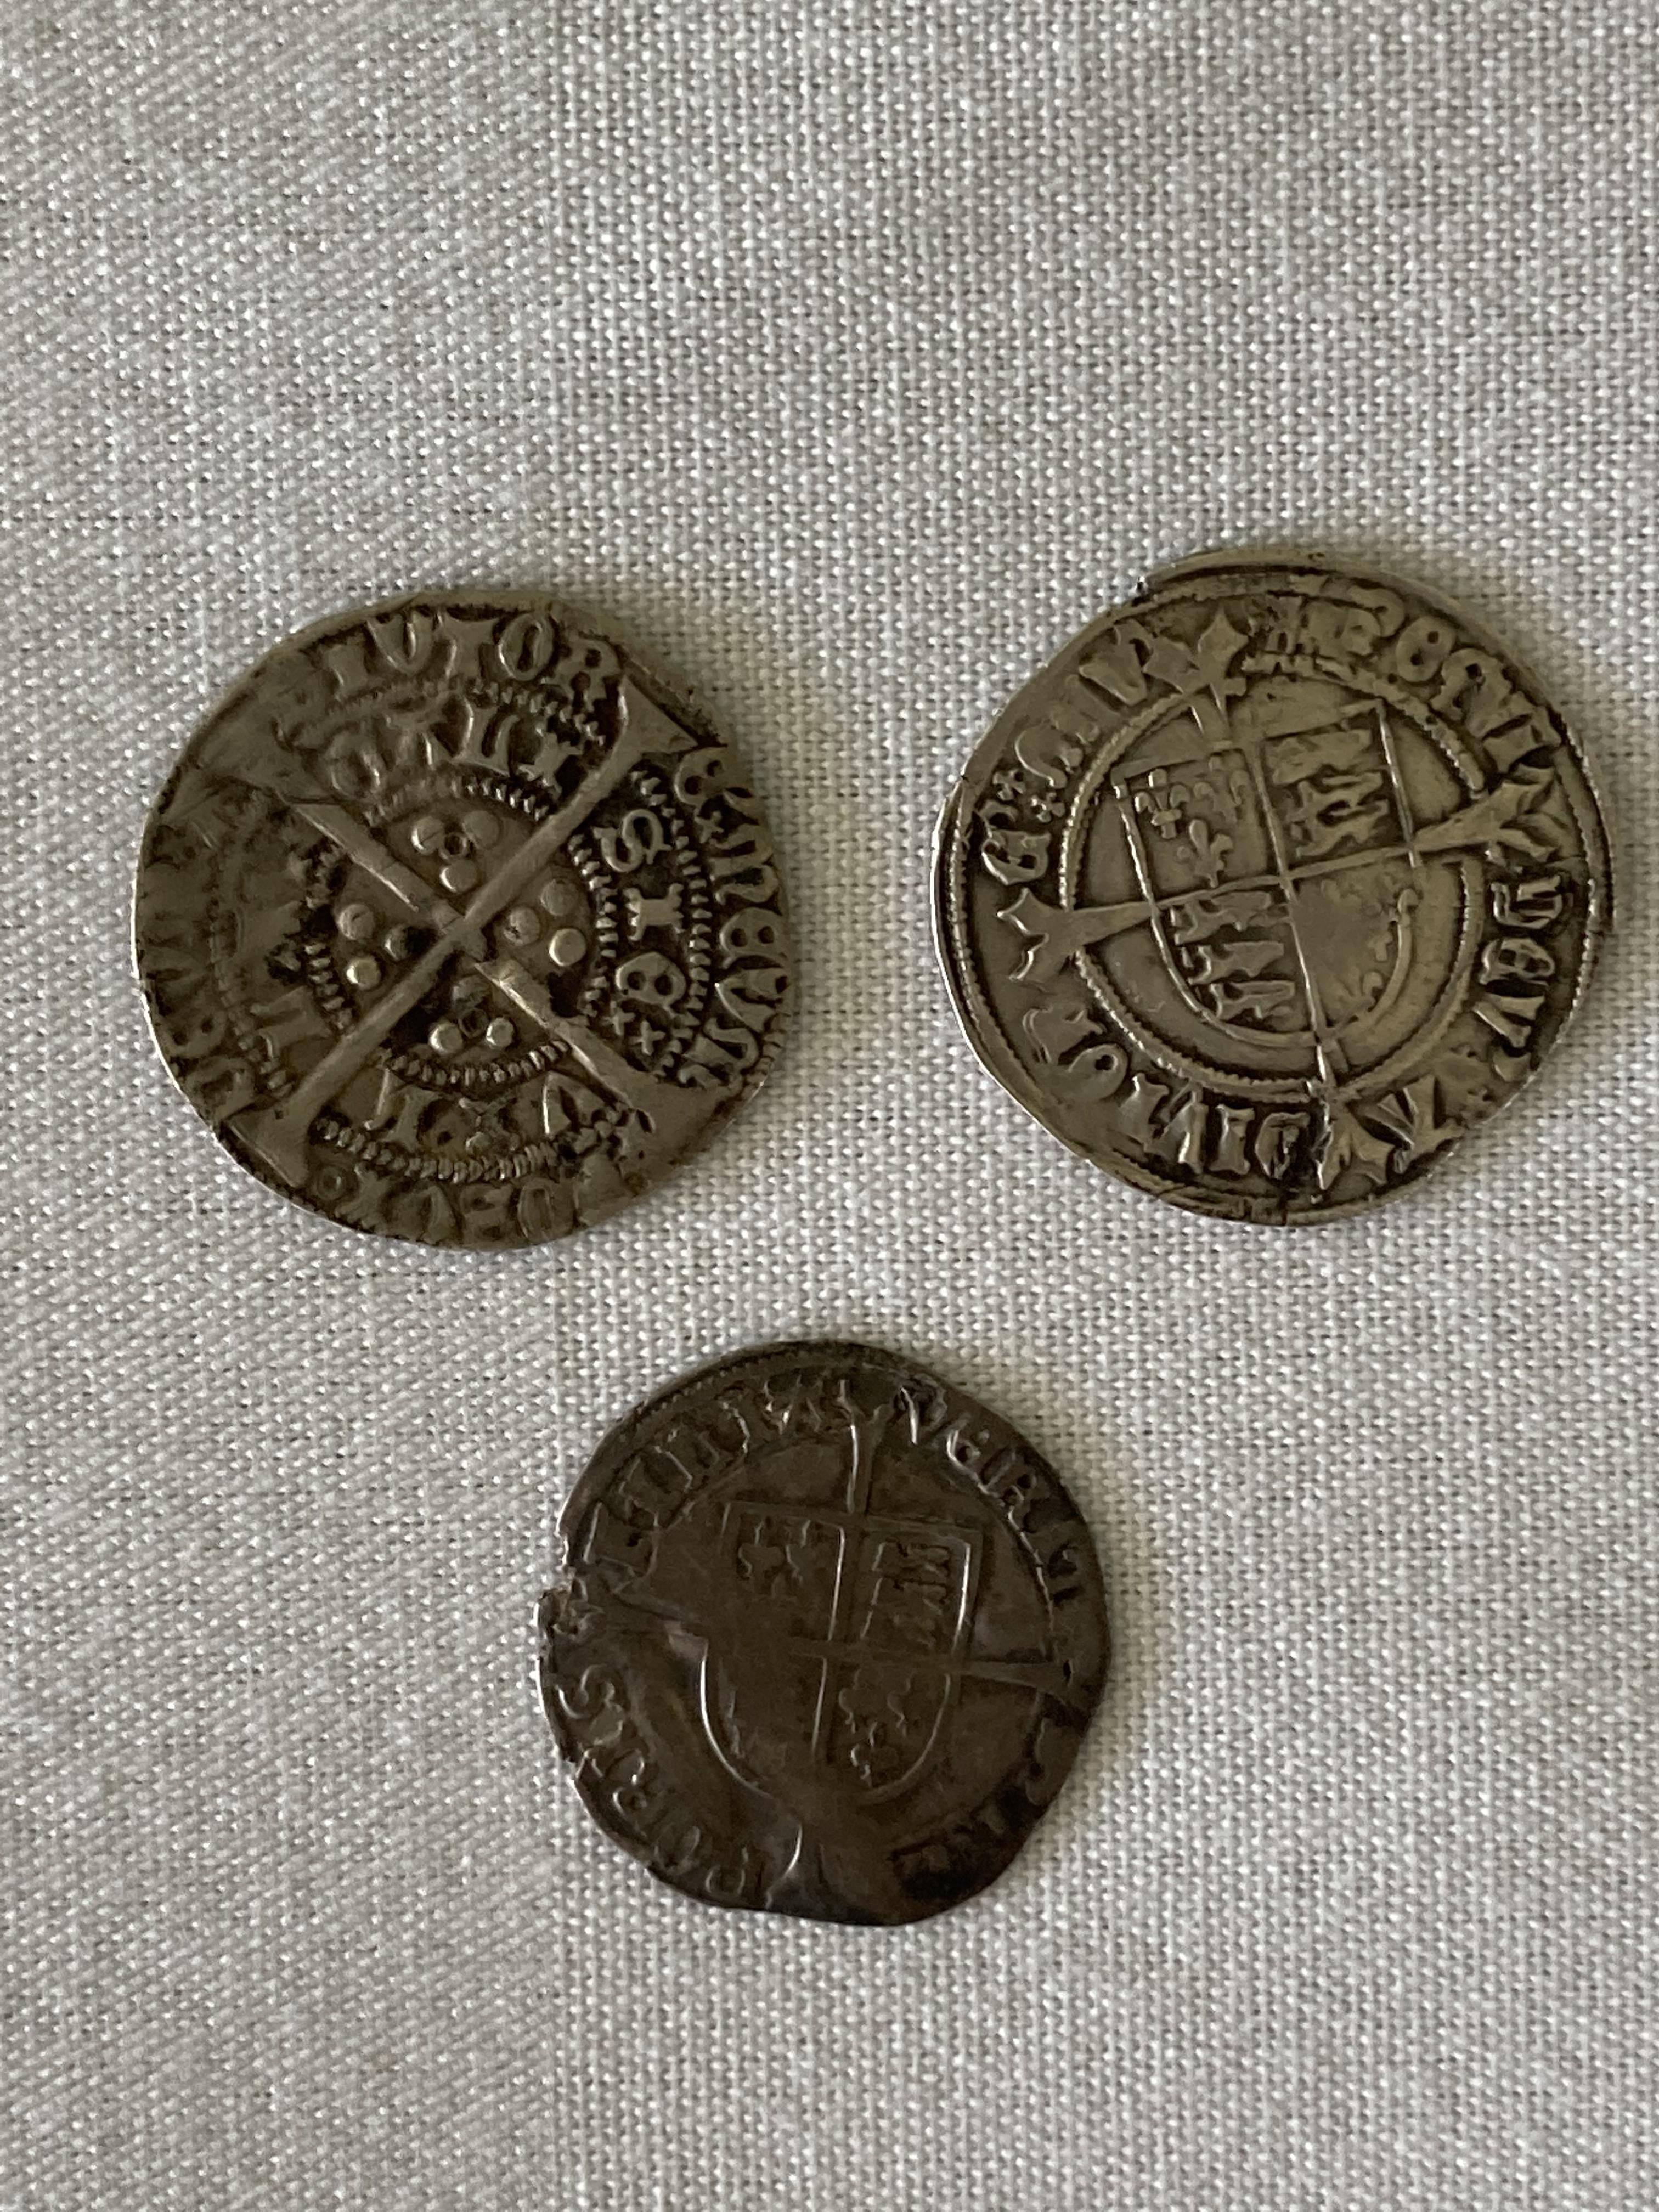 British and Commonwealth coins - Image 5 of 7